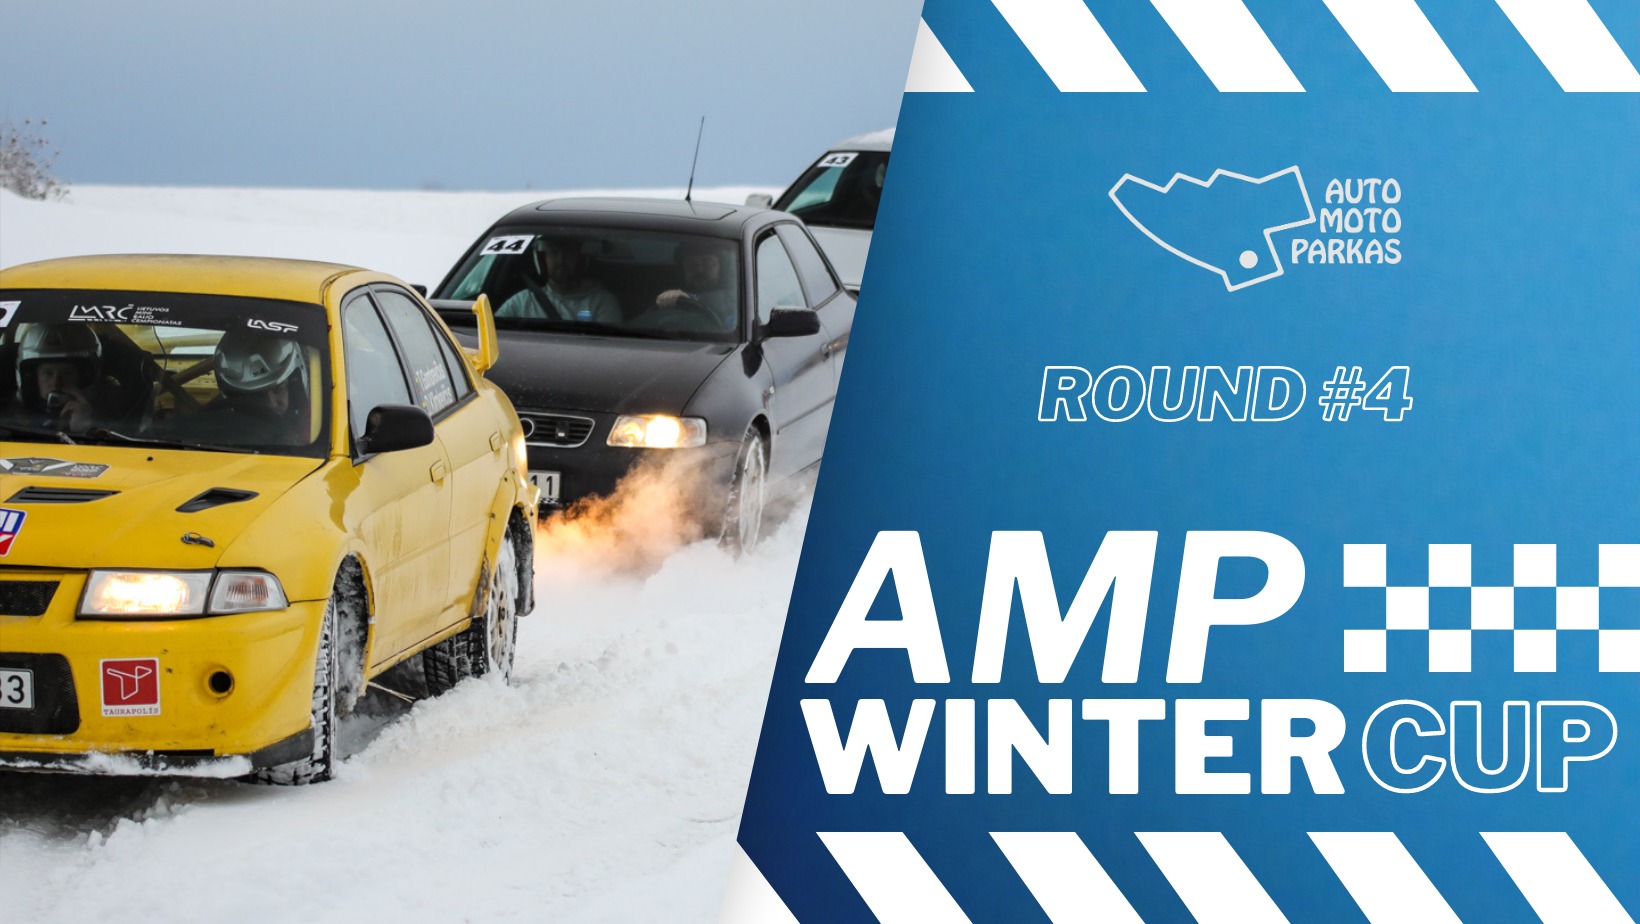 "AMP Winter Cup" round #4